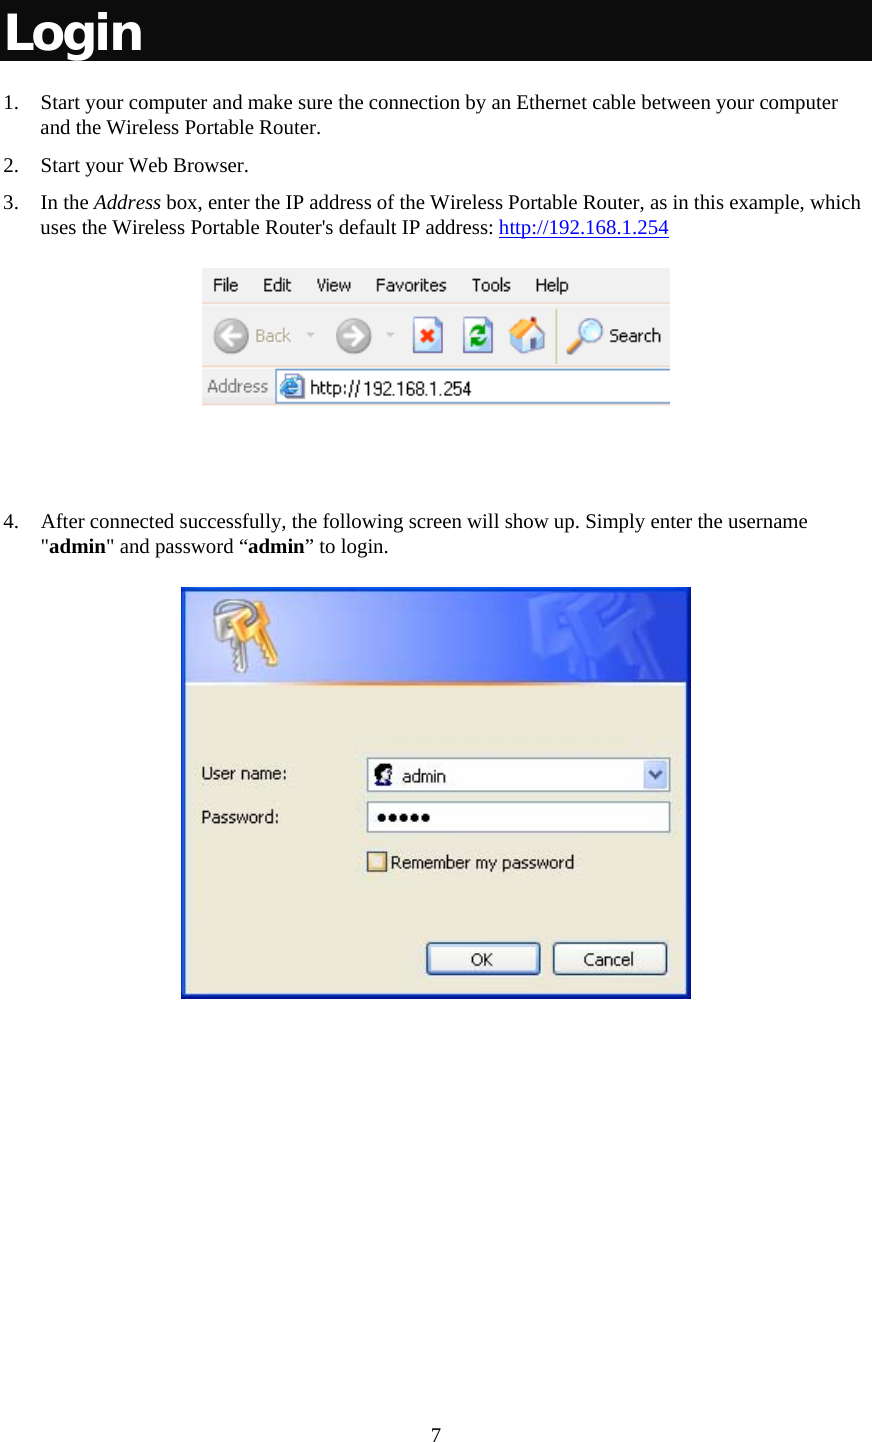   7 Login 1. Start your computer and make sure the connection by an Ethernet cable between your computer and the Wireless Portable Router. 2. Start your Web Browser. 3. In the Address box, enter the IP address of the Wireless Portable Router, as in this example, which uses the Wireless Portable Router&apos;s default IP address: http://192.168.1.254    4. After connected successfully, the following screen will show up. Simply enter the username &quot;admin&quot; and password “admin” to login.   